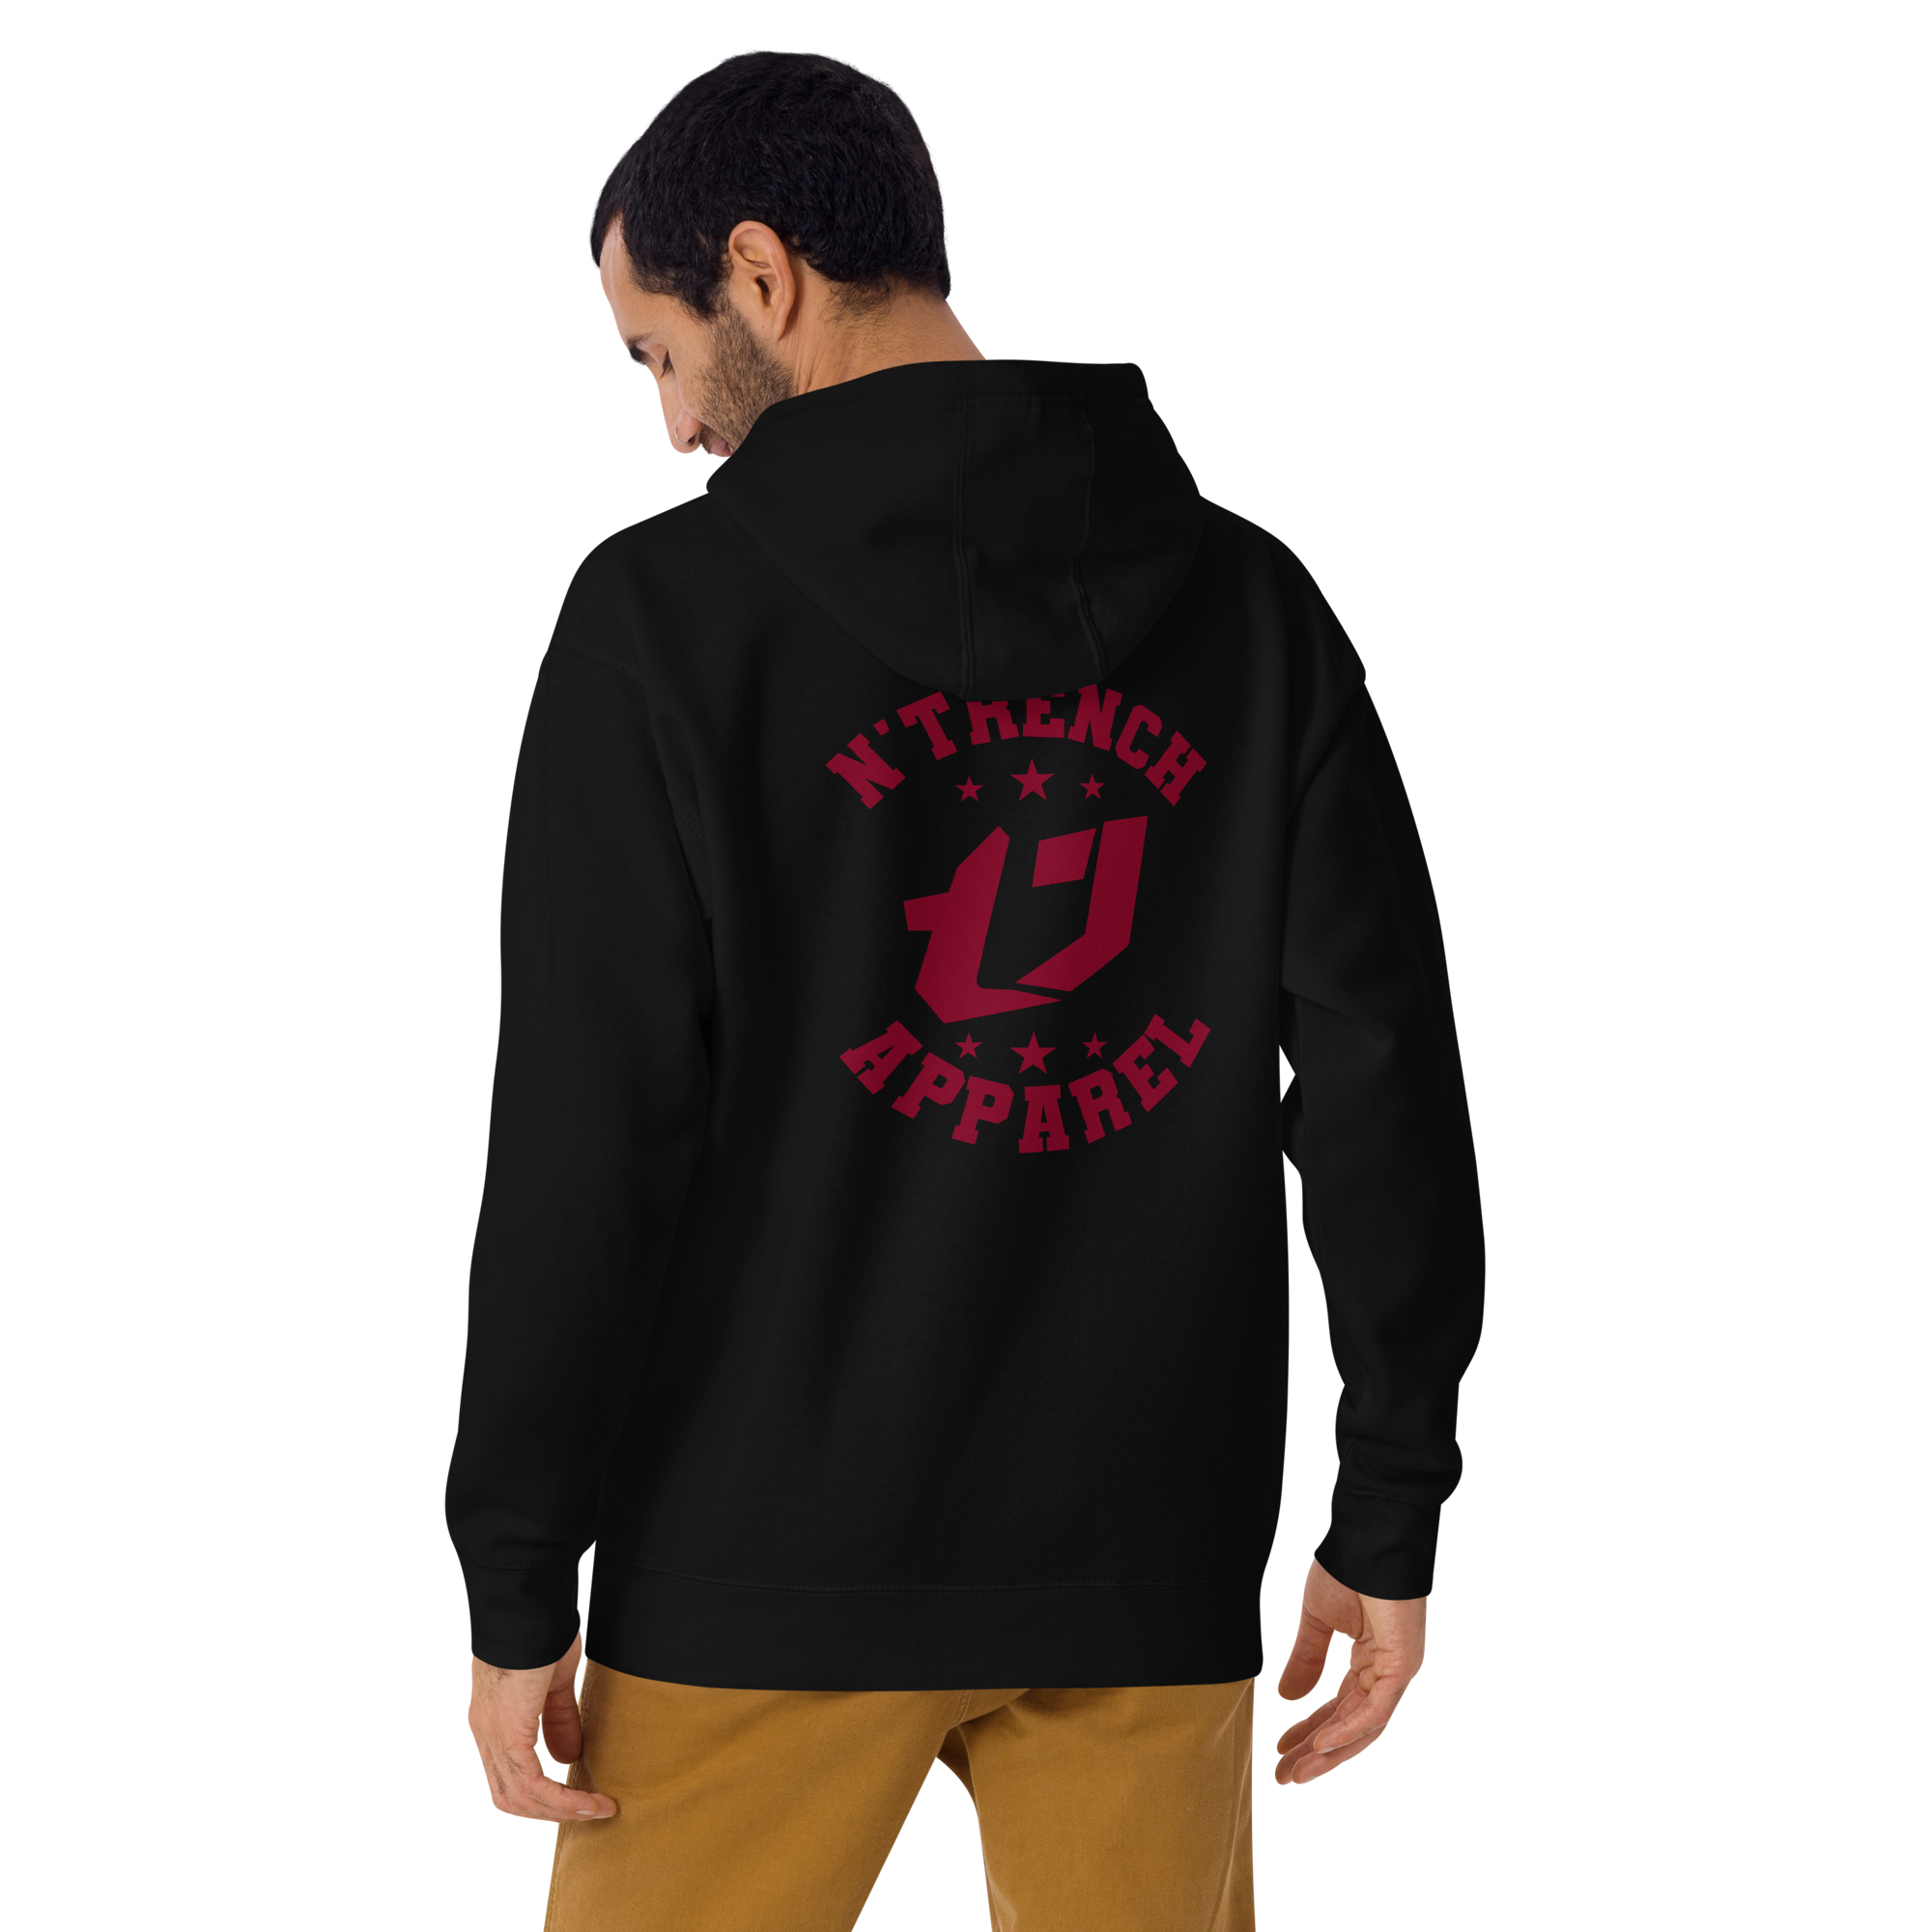 N'Trench Apparel Burgundy Logo And Font Back design Unisex Hoodie